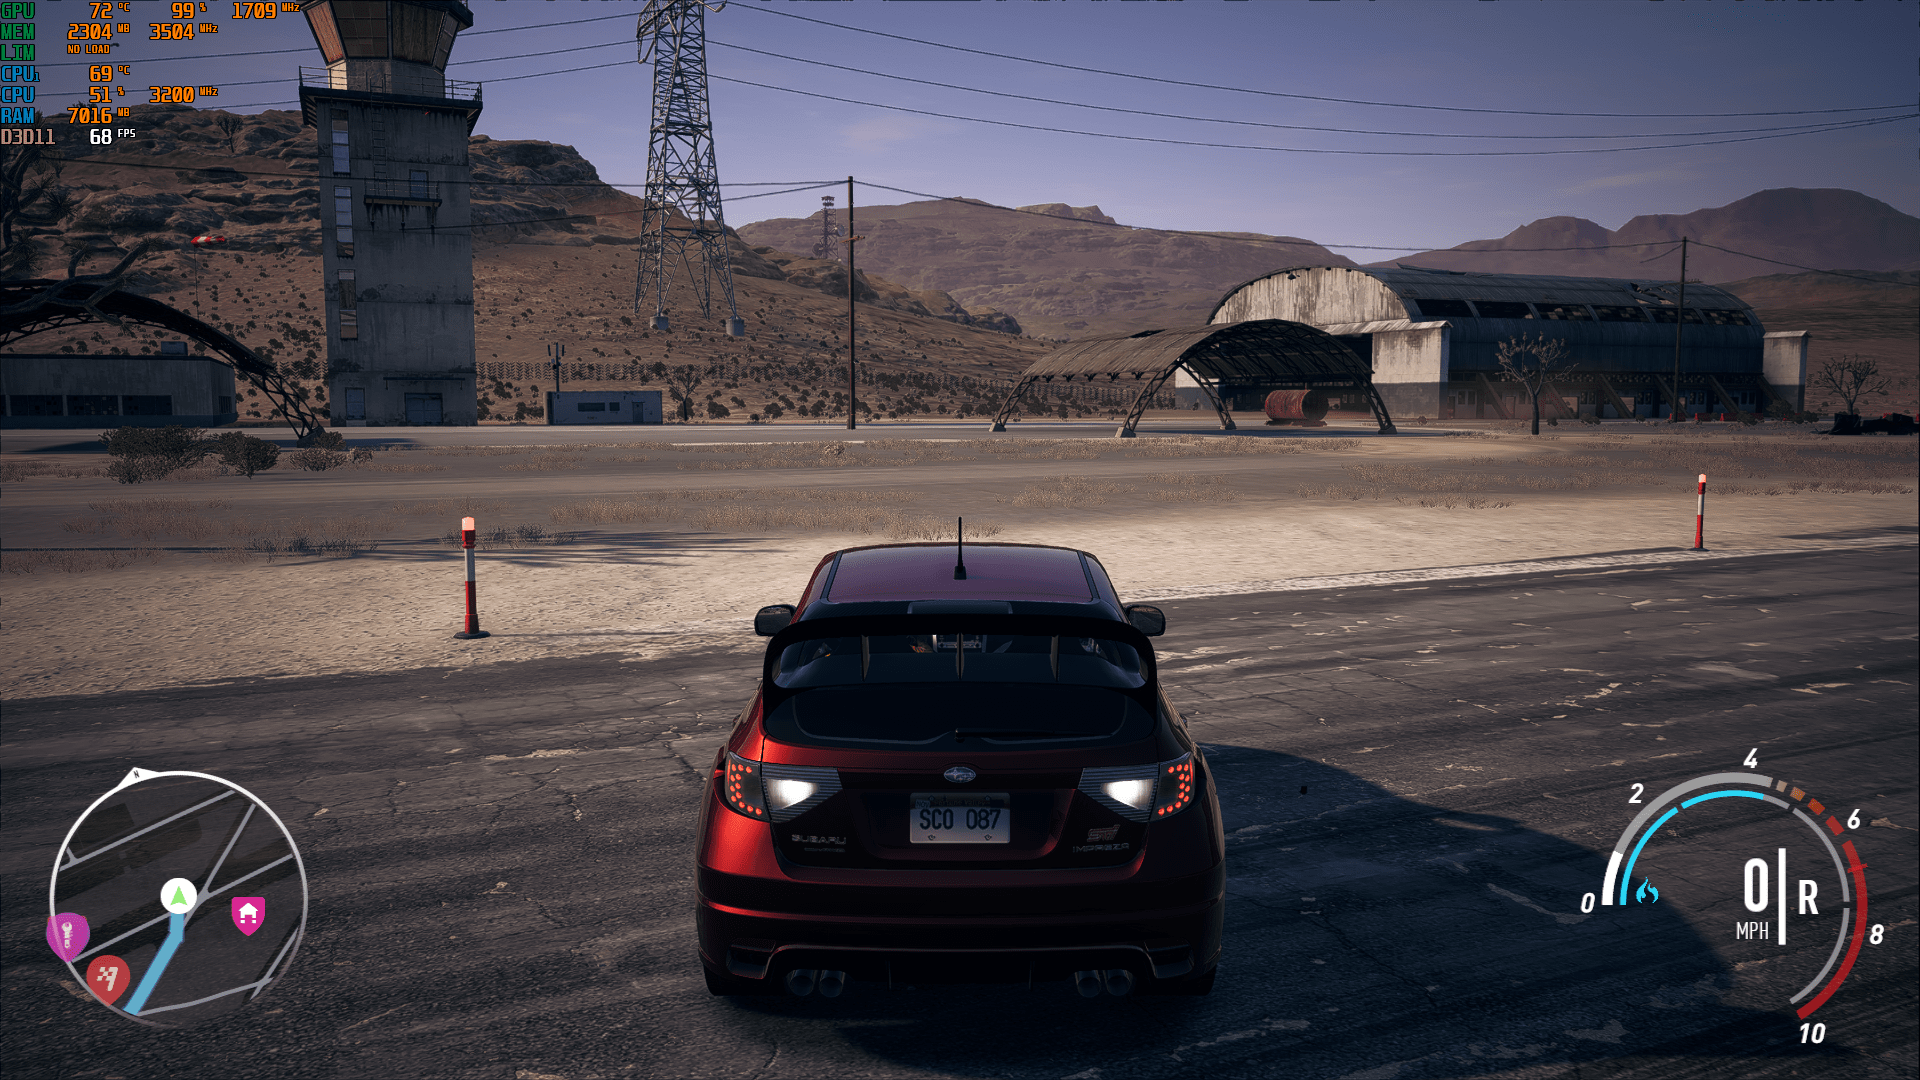 Need for Speed Payback Screenshot 2018.06.10 - 18.59.10.25-min.png